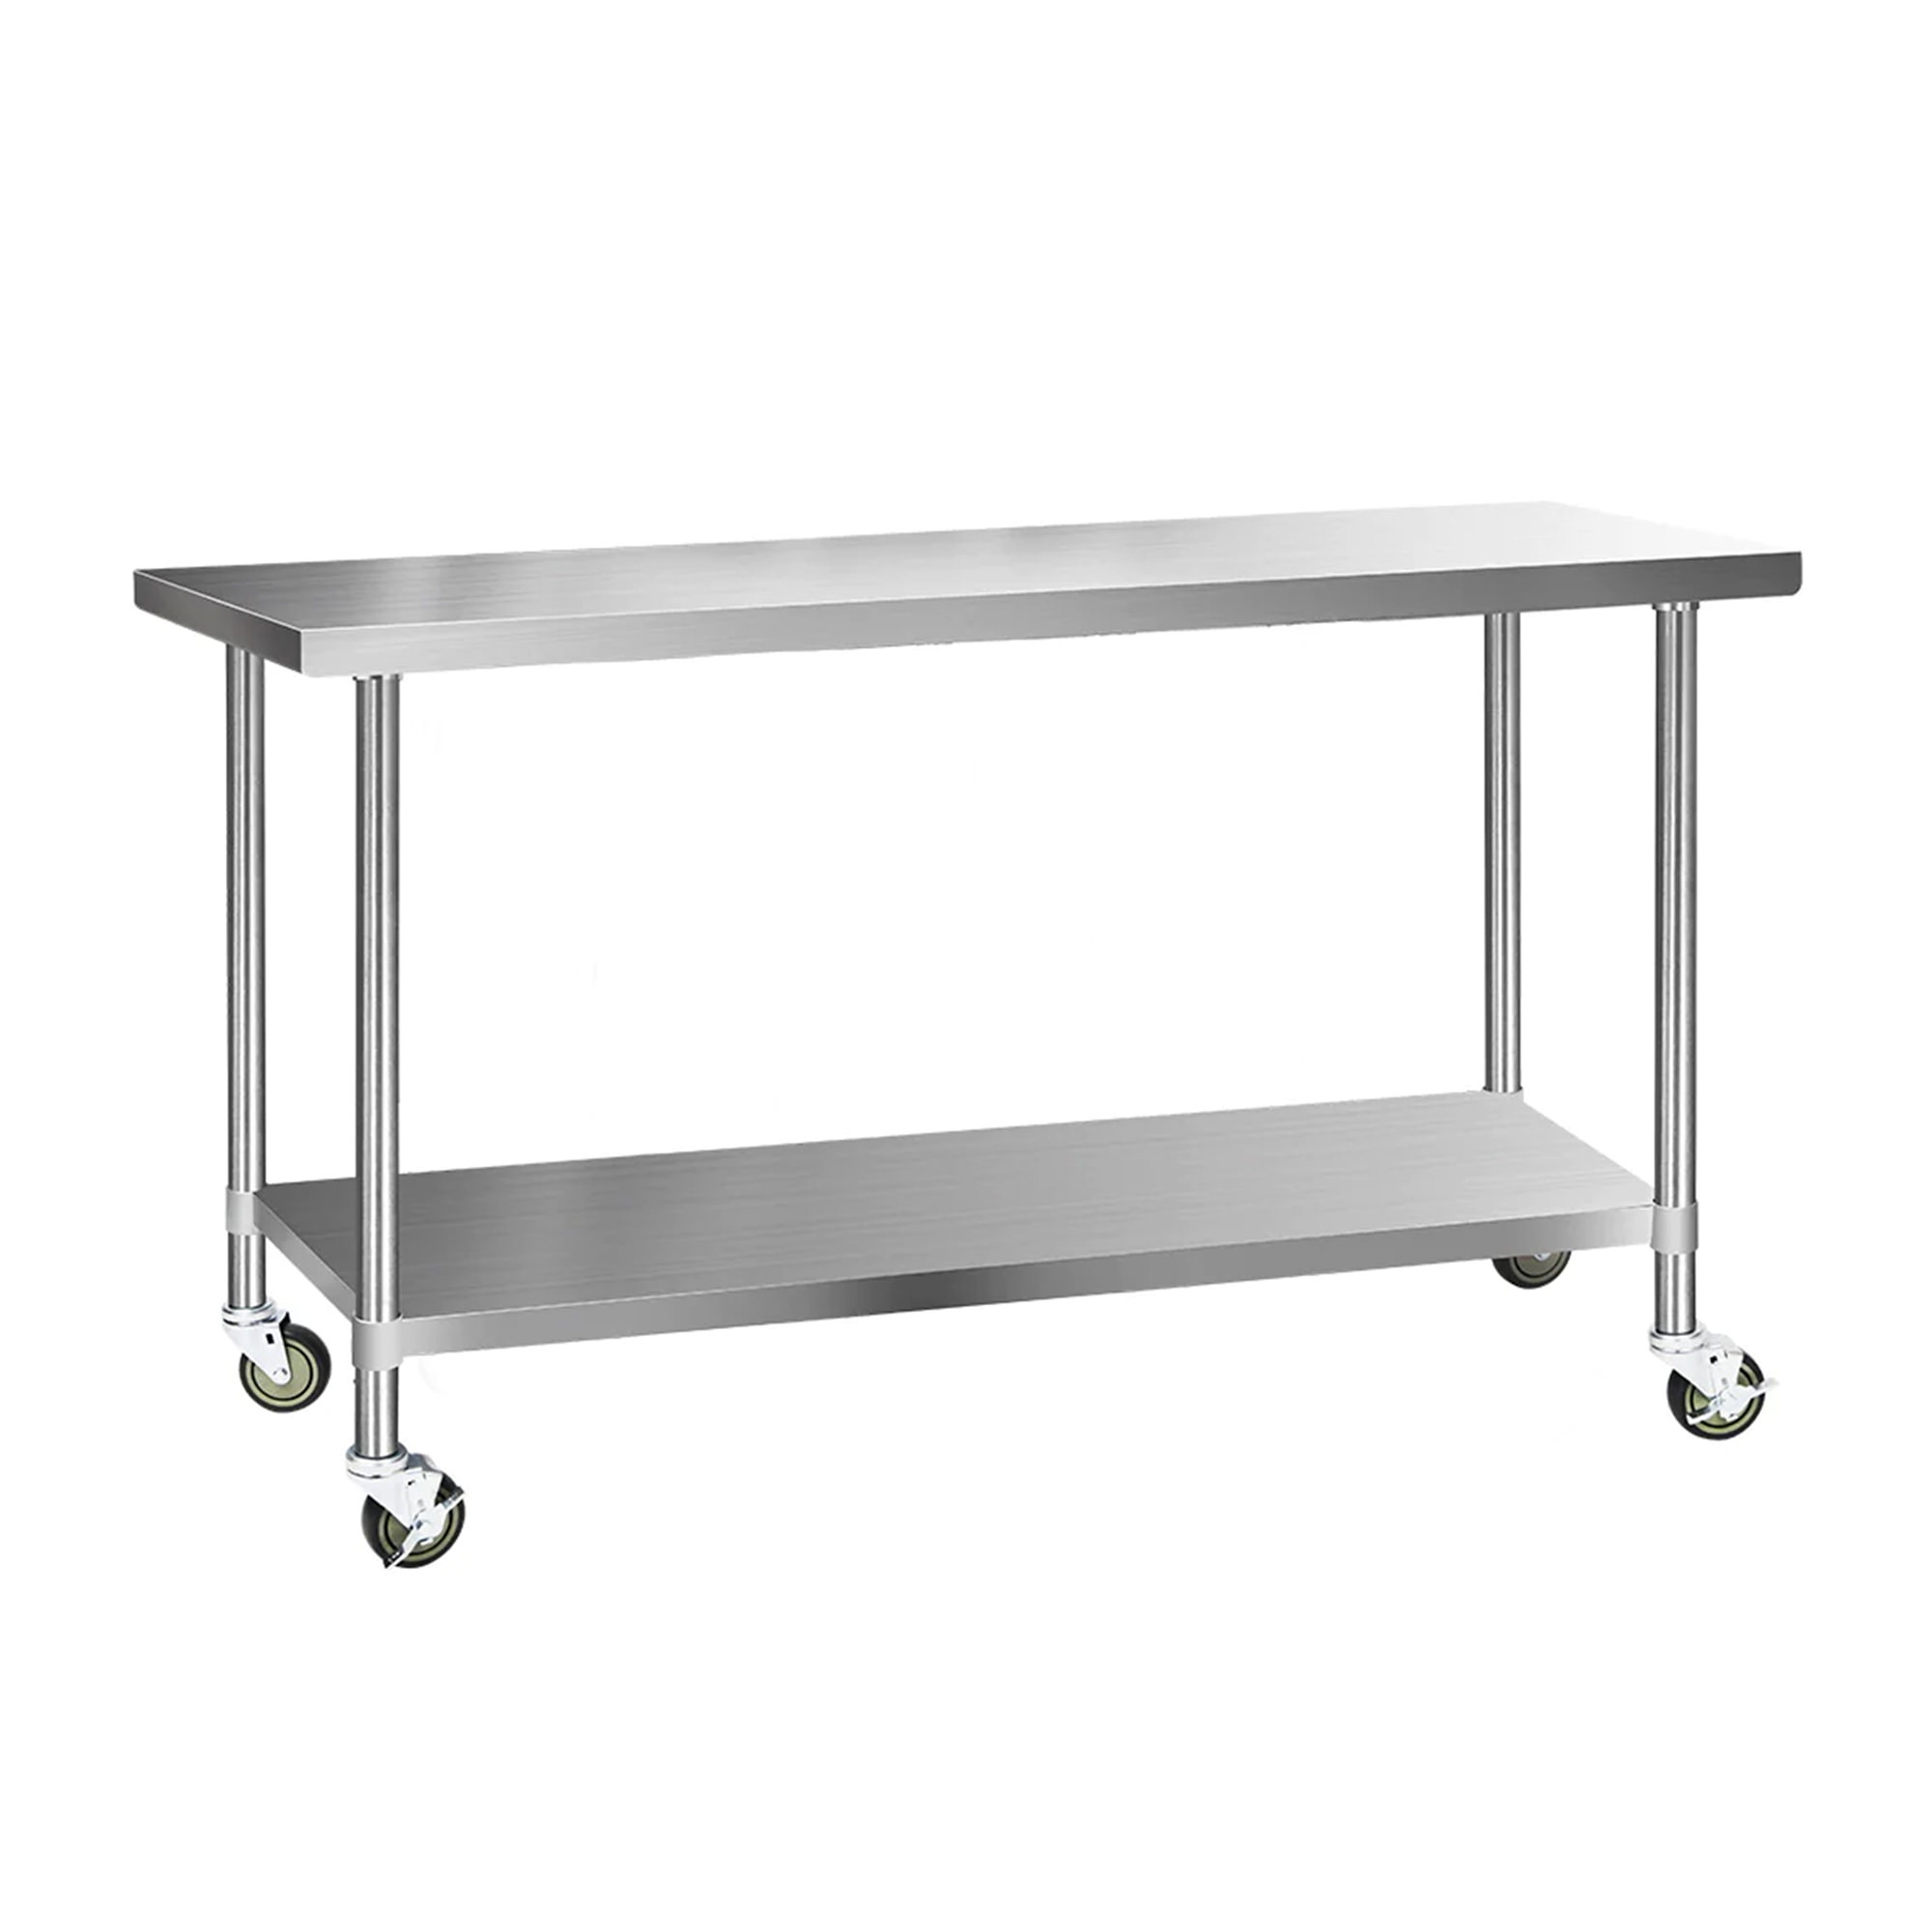 Cefito 430 Stainless Steel Kitchen Bench with Wheels 182.9x61cm Image 2